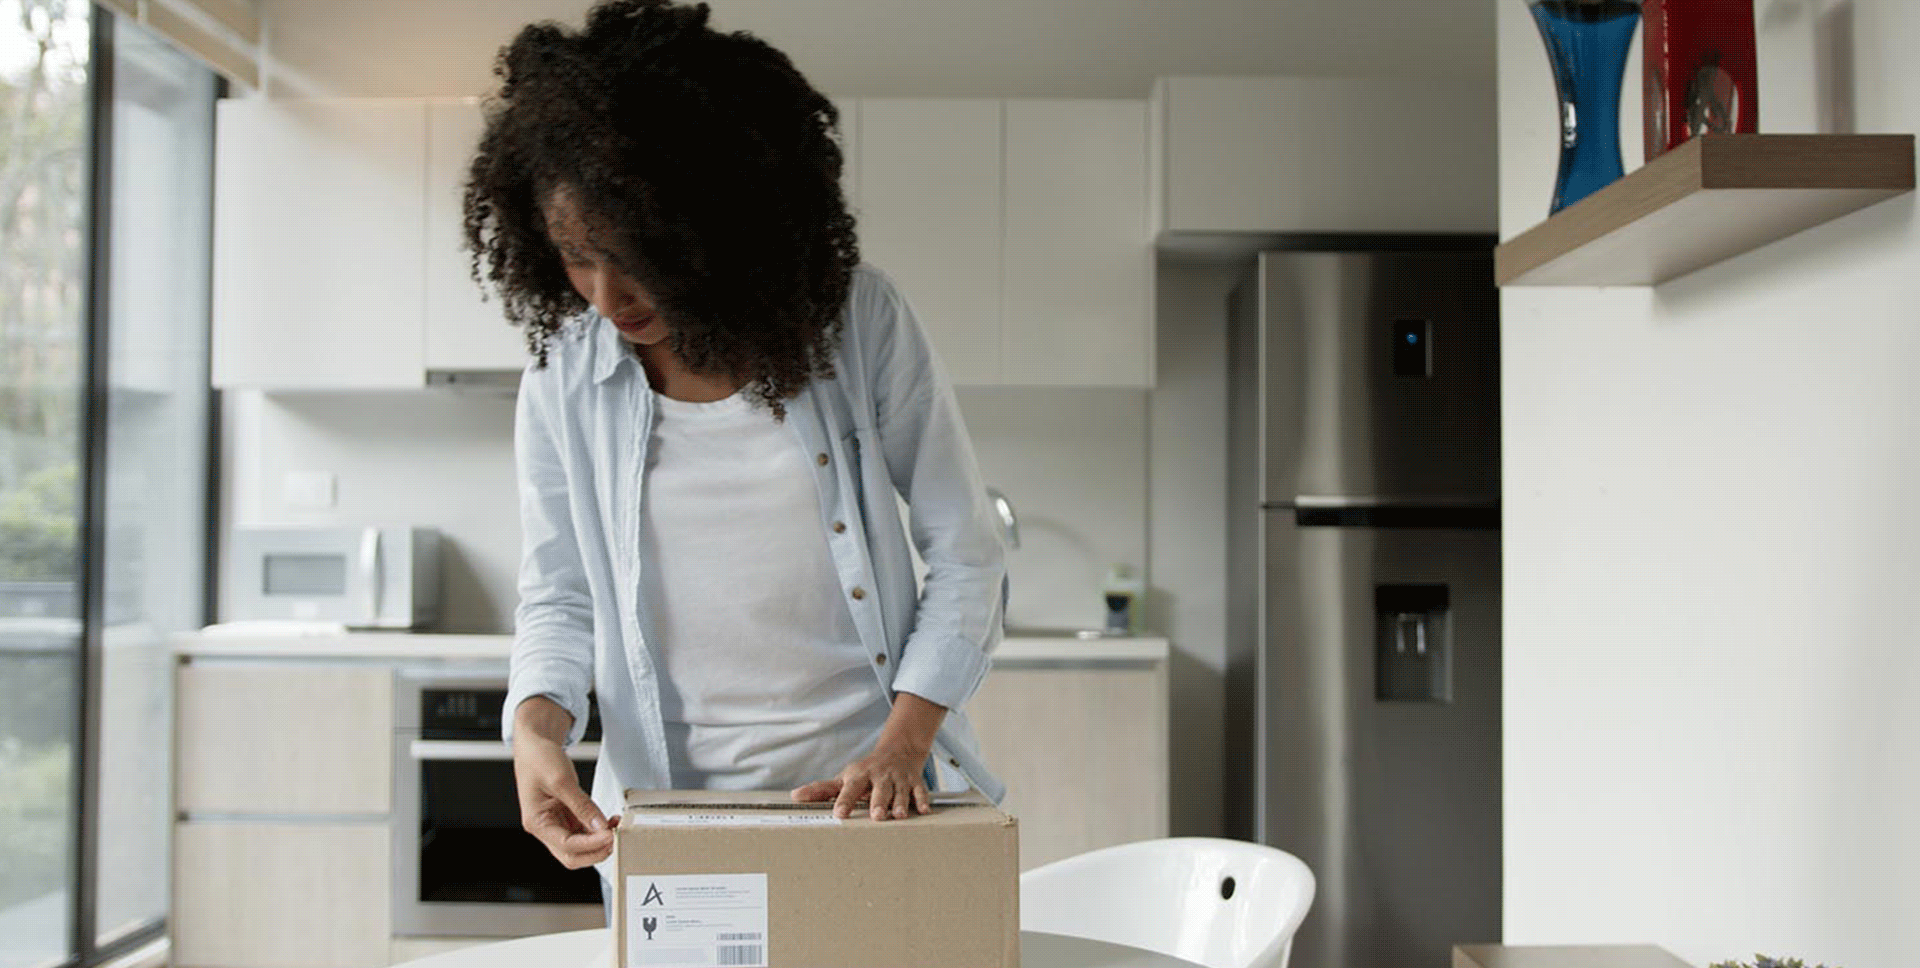 Animated GIF of woman opening a package and throwing her hands up in celebration